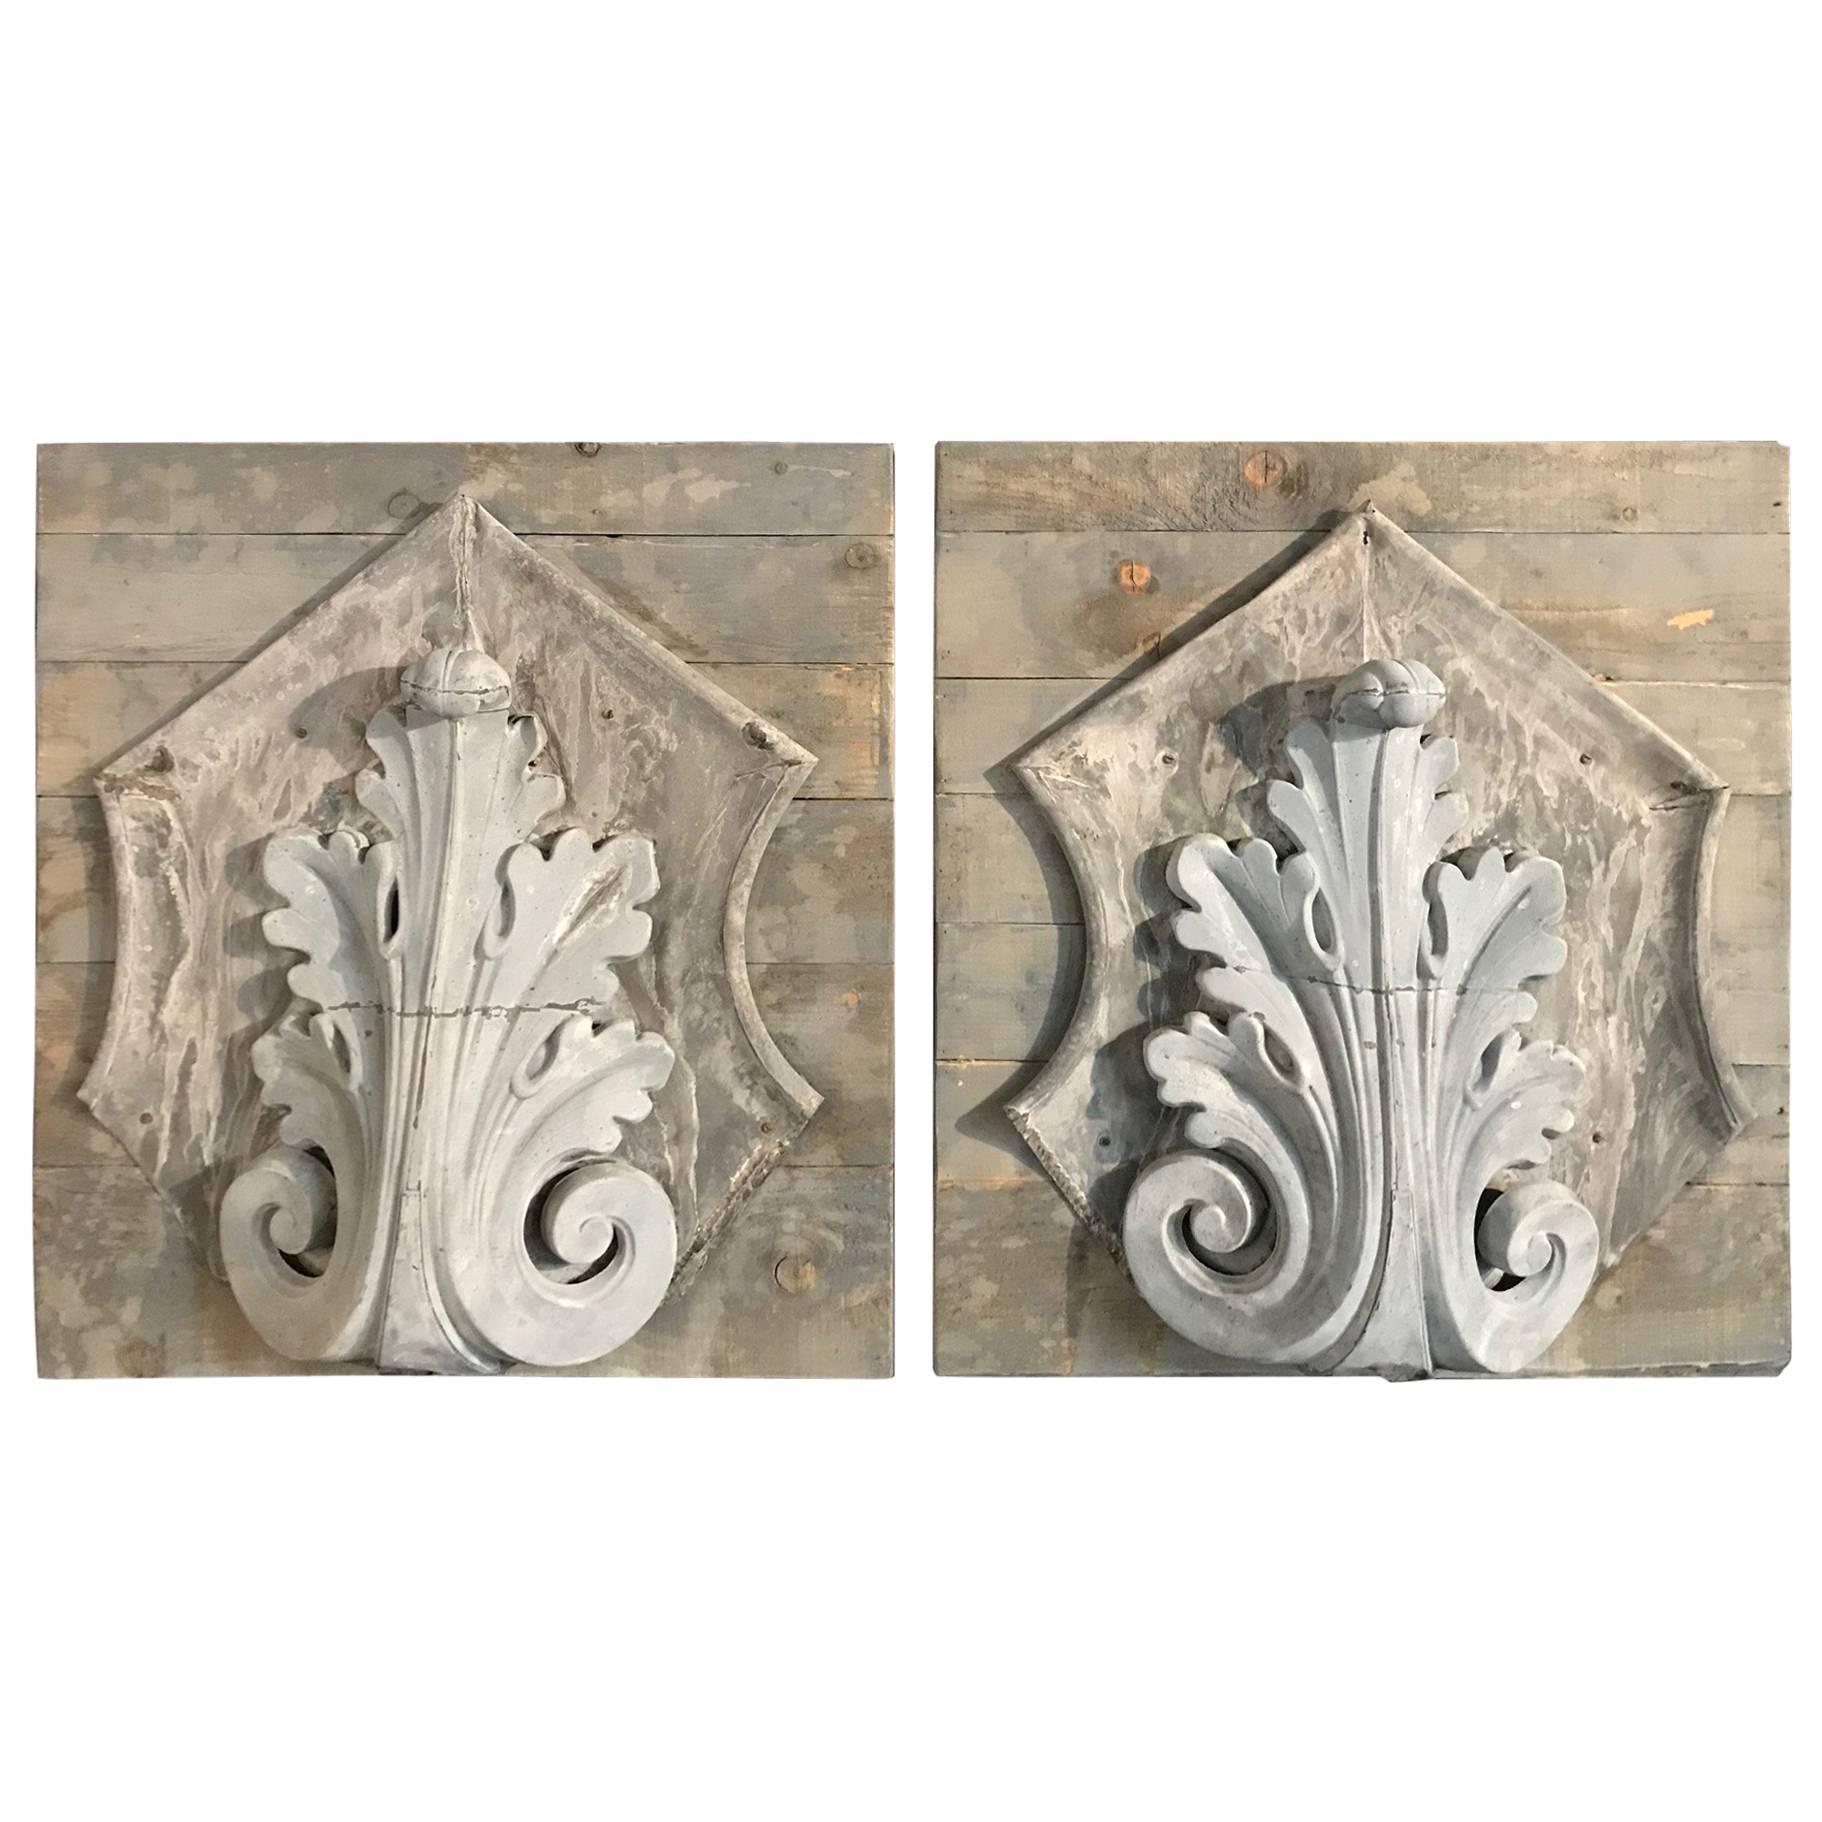 Pair of 19th Century Mounted Zinc Architectural Fragments